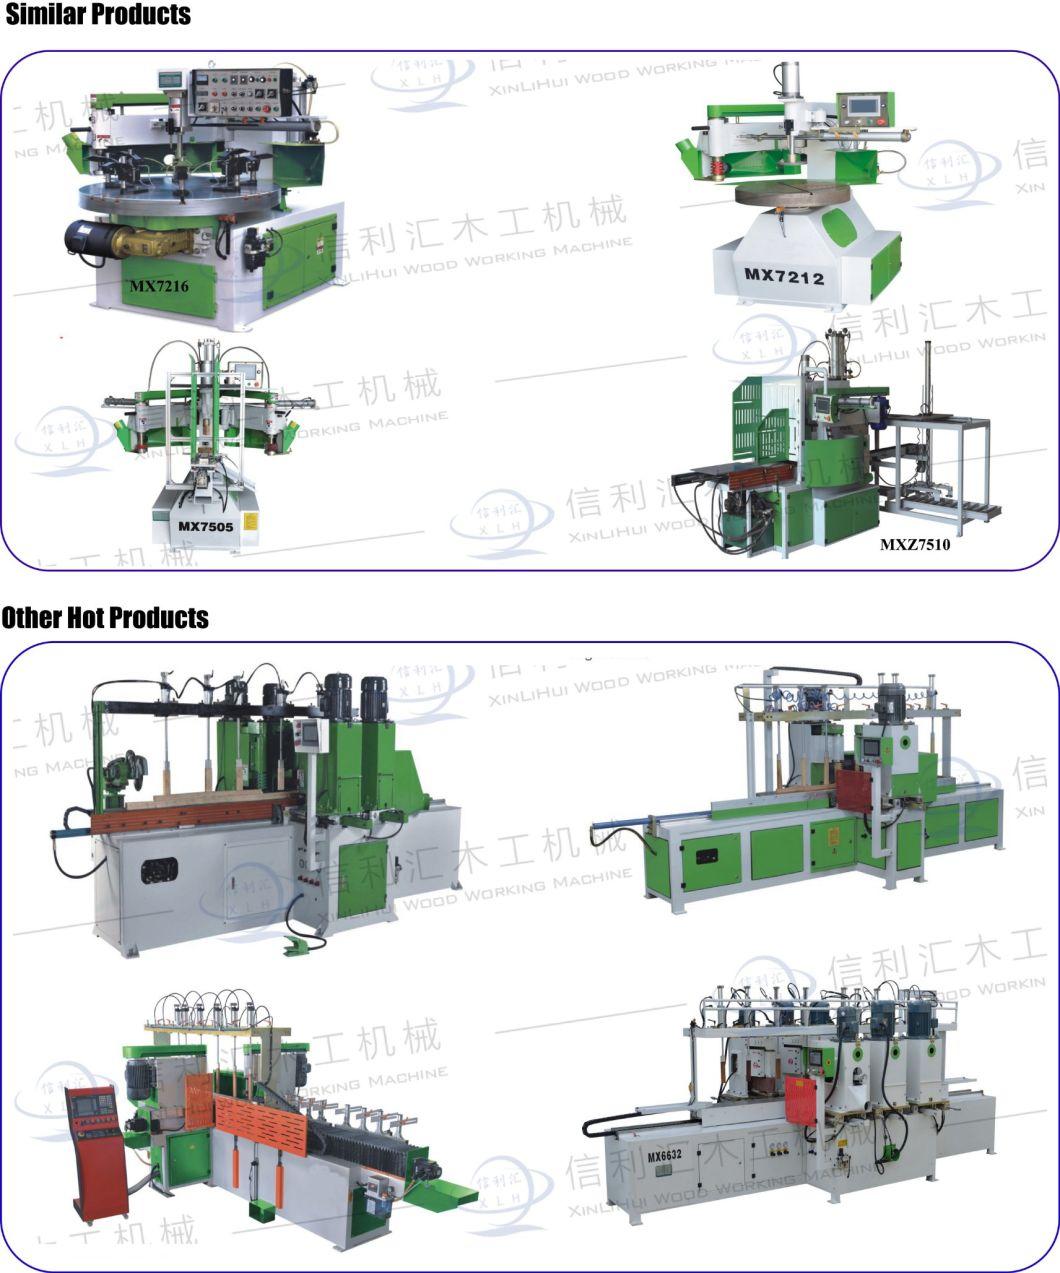 New Furniture Factory in Nepal Provide Good Wood Machines with Reliable Price. Copy Lethe/ Wooden Lethe Log Cutting, Bed,